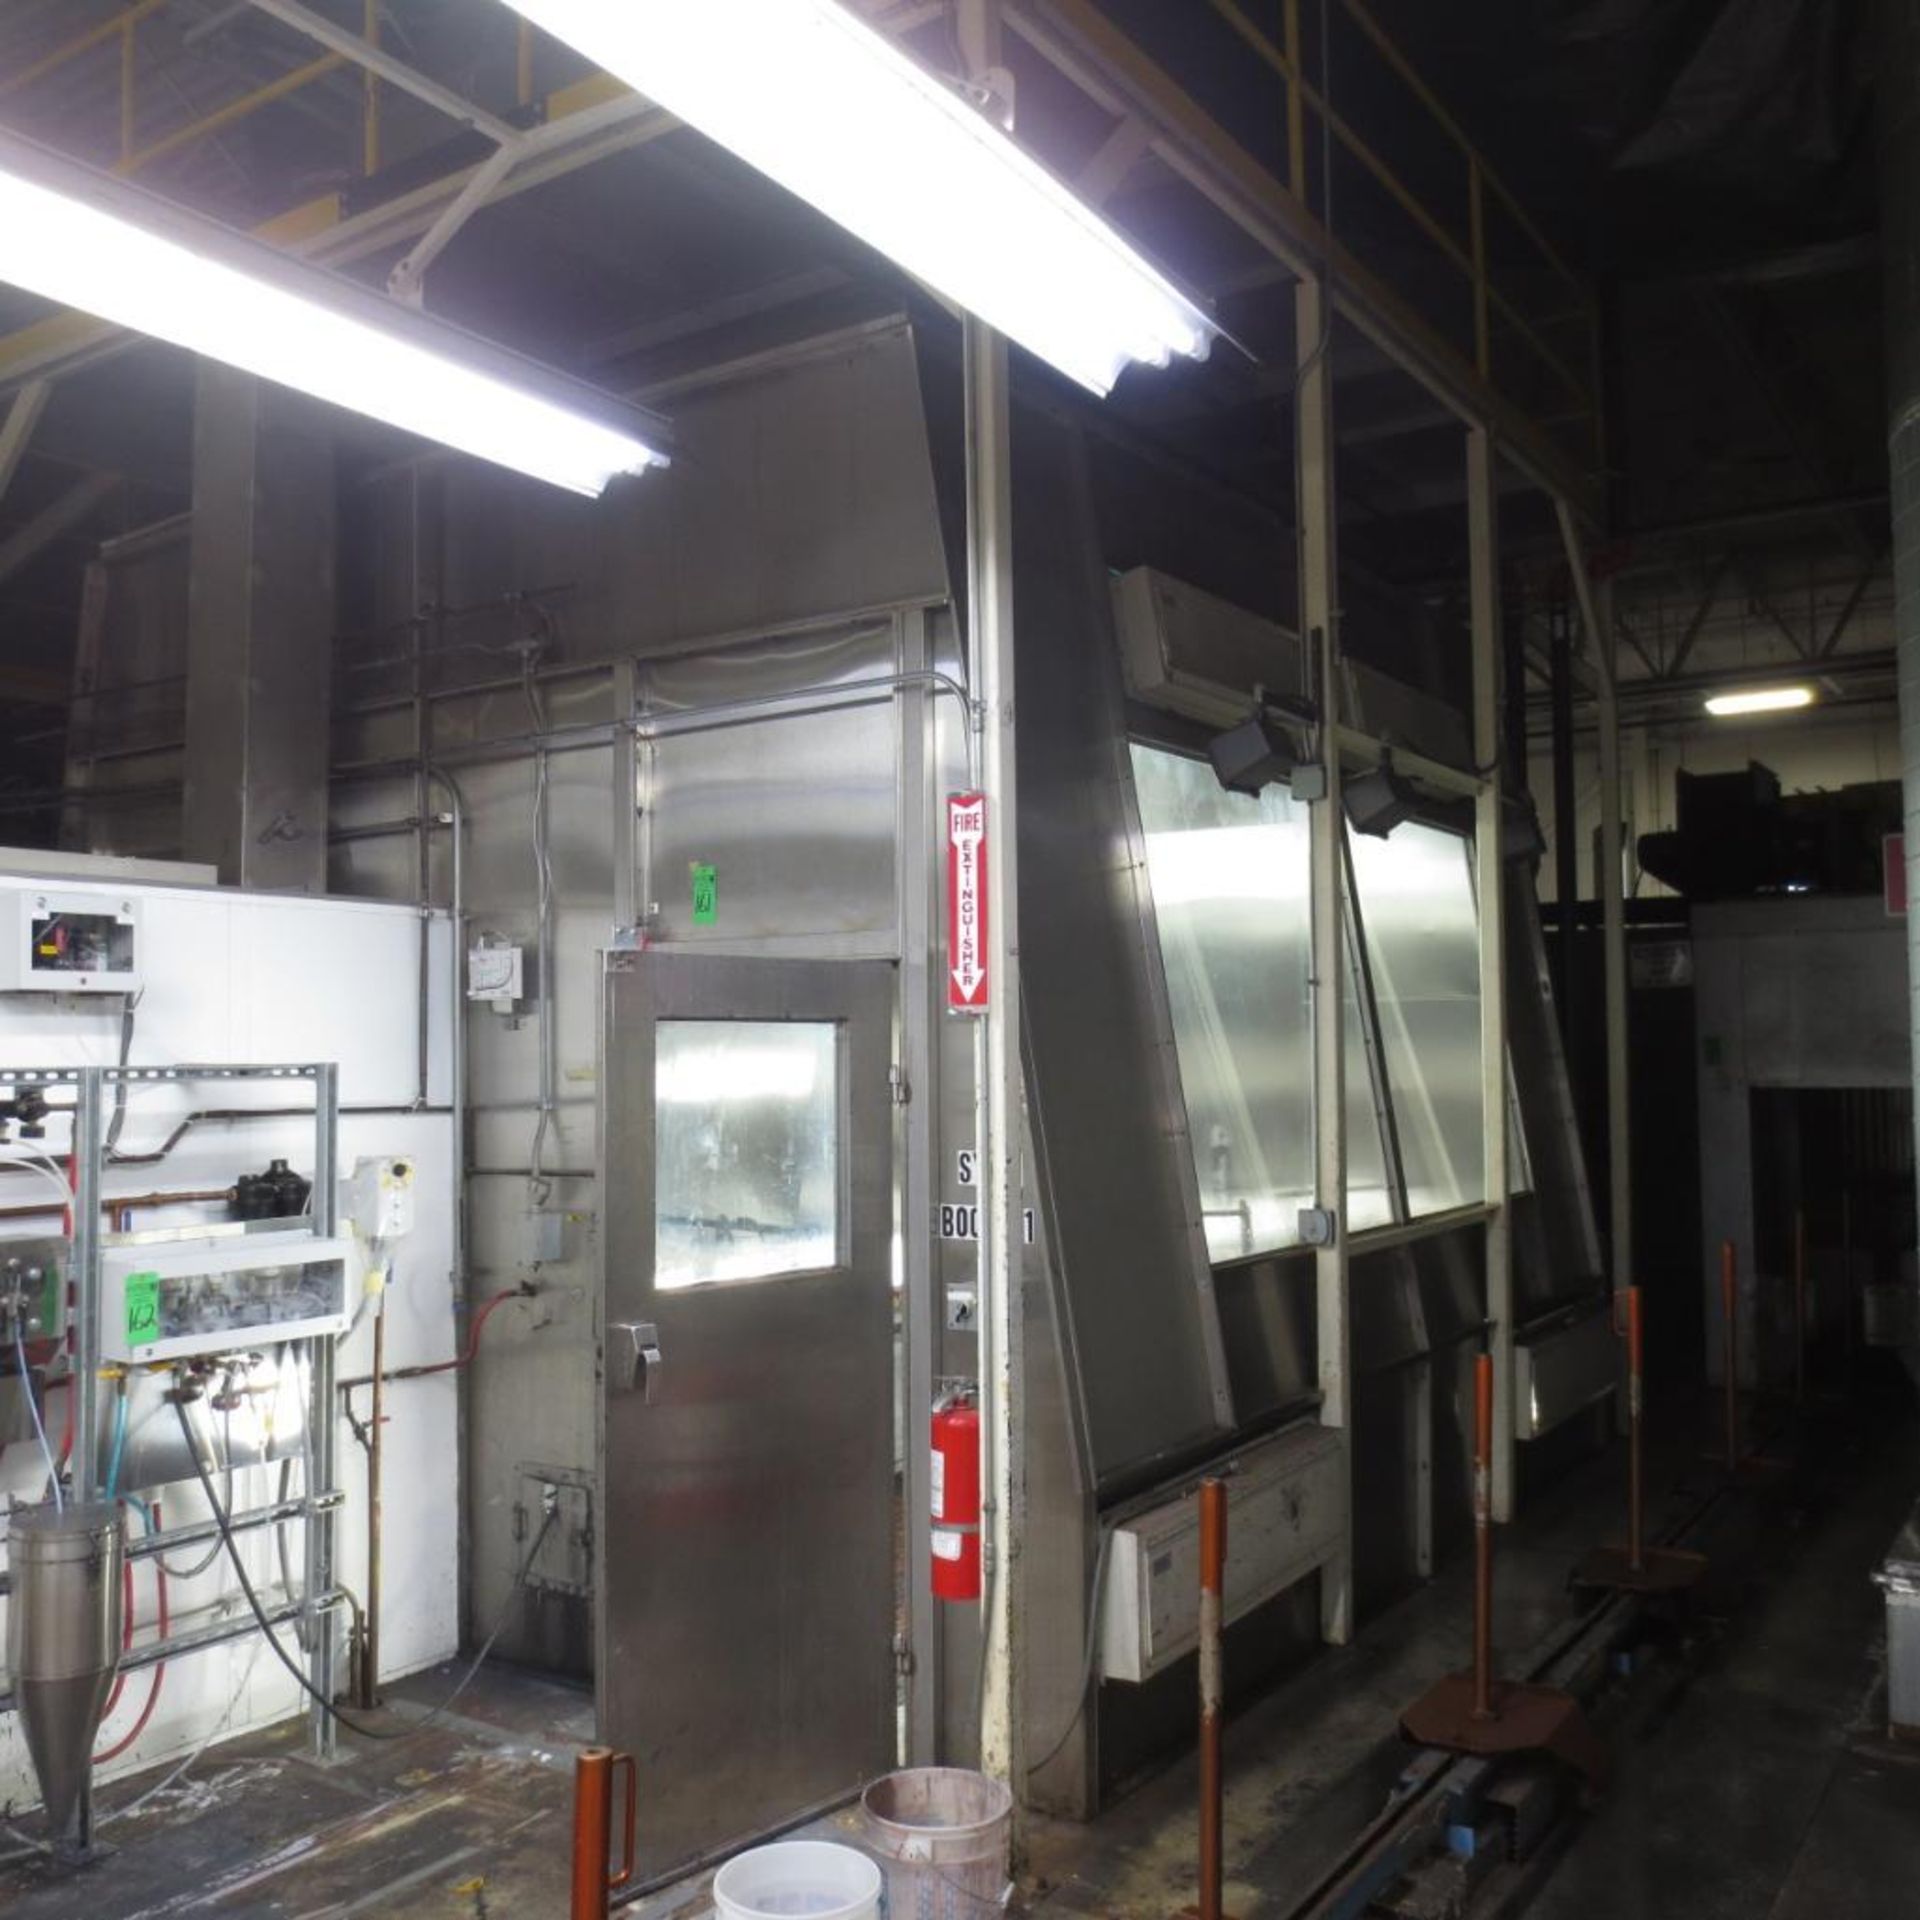 SS Spray Booth **No Ductwork is included in this lot** **This lot is Subject to the Bulk Bid Lot 158